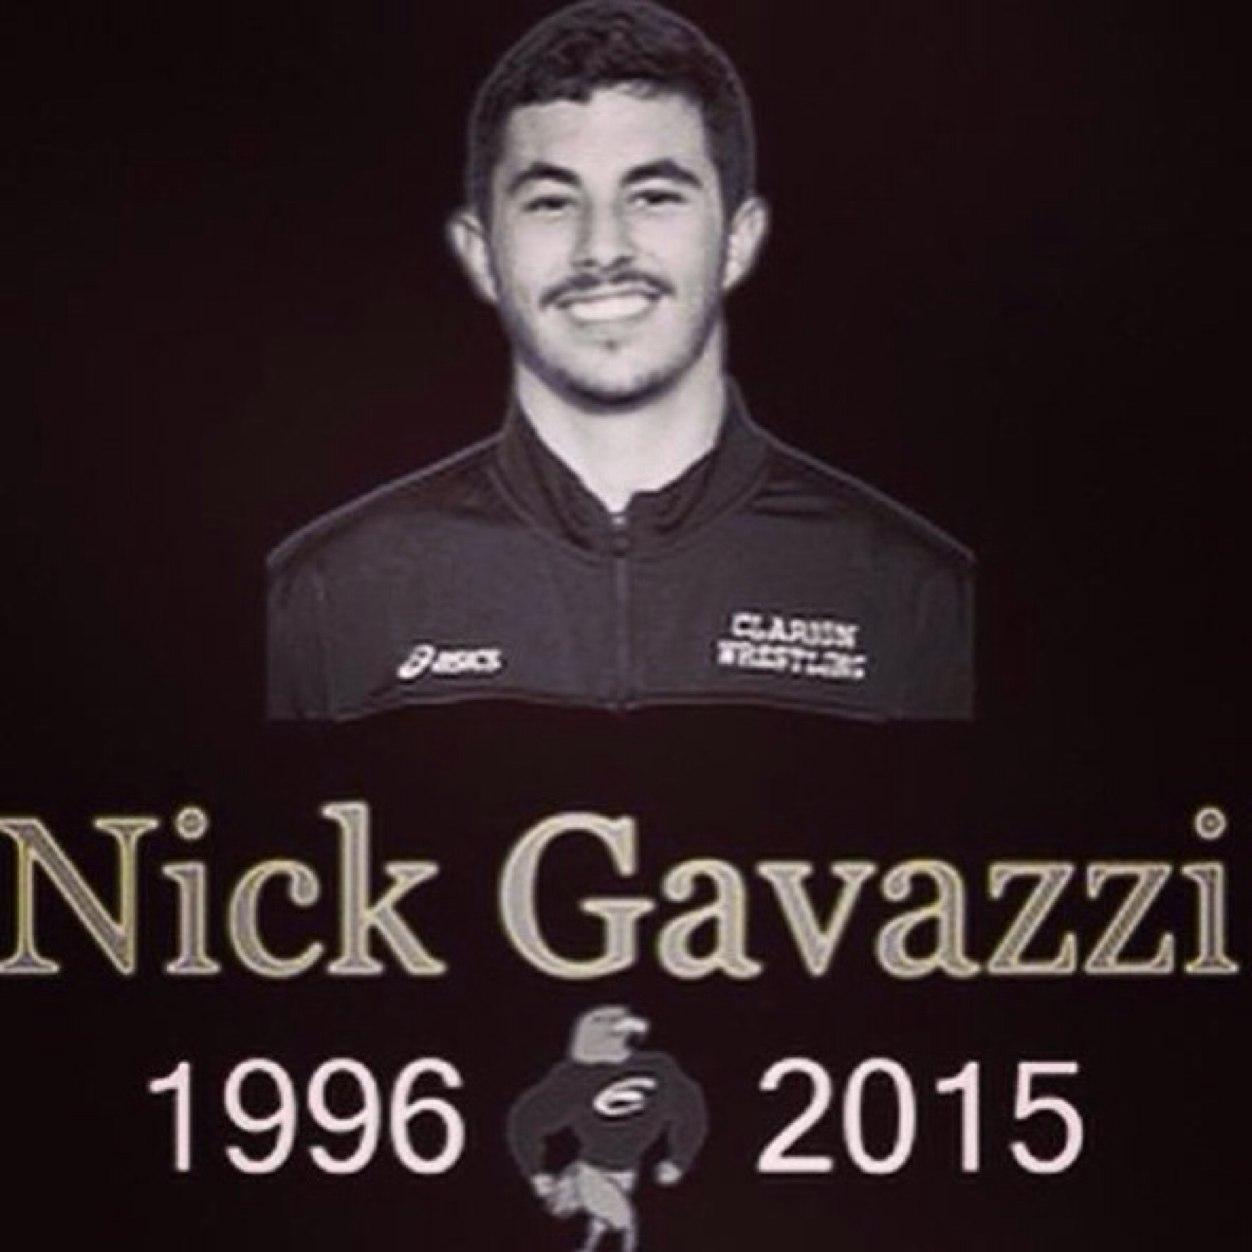 Nick Gavazzi was an extrodinary wrestler and scholar He achieved great things in his lifetime from becoming a valedictorian/D1 athlete. Help pass on his legacy.